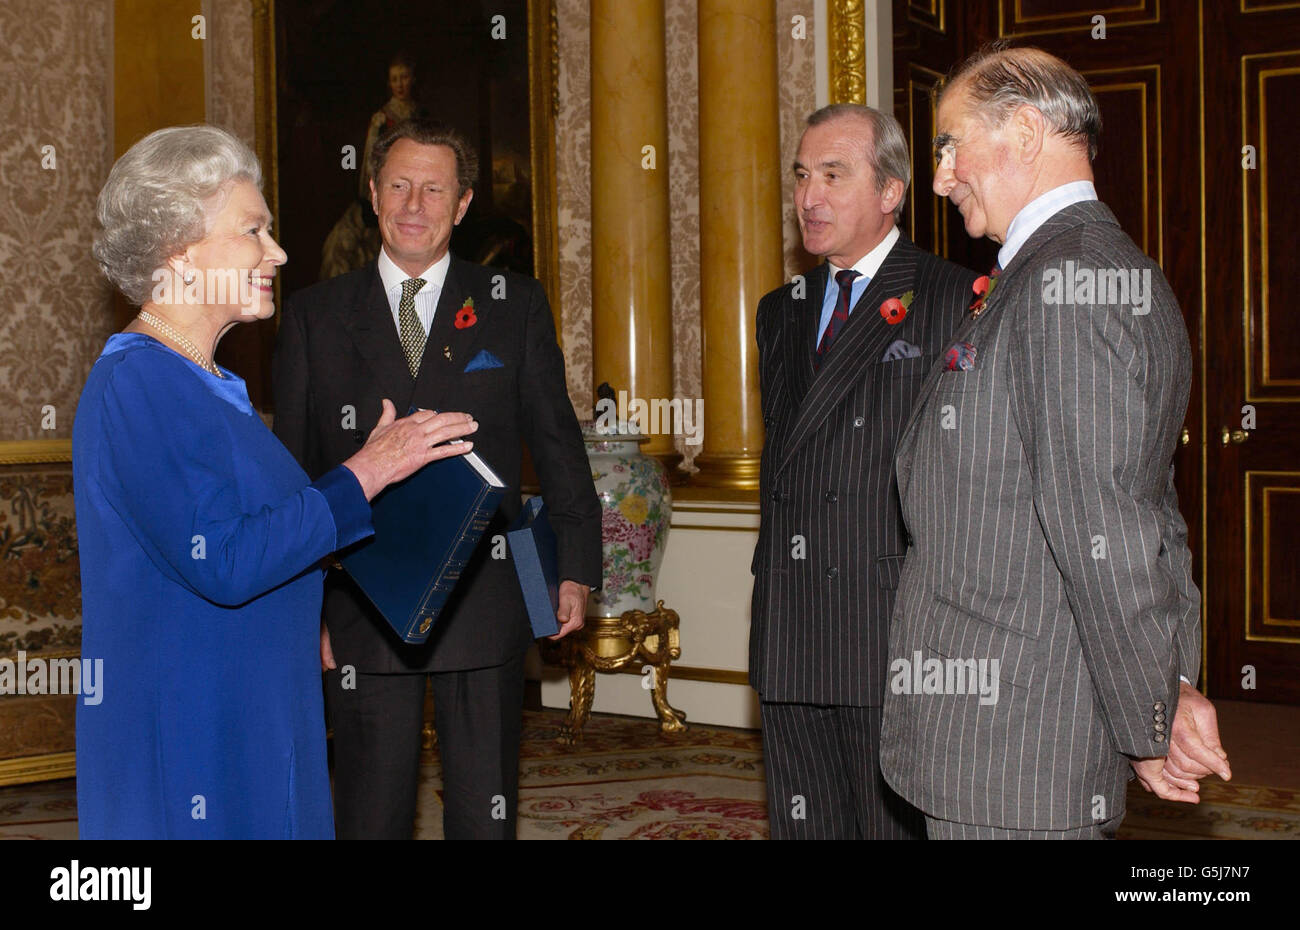 The Queen receives Brigadier Brian Harding (second right) of the Royal British Legion, who presented her with a copy of his book 'Keeping The Faith', accomapnied by Leiutenant General Sir Roderick Cordy-Simpson (left) and Brigadier Ian Townsend, at Buckingham Palace, London. Stock Photo